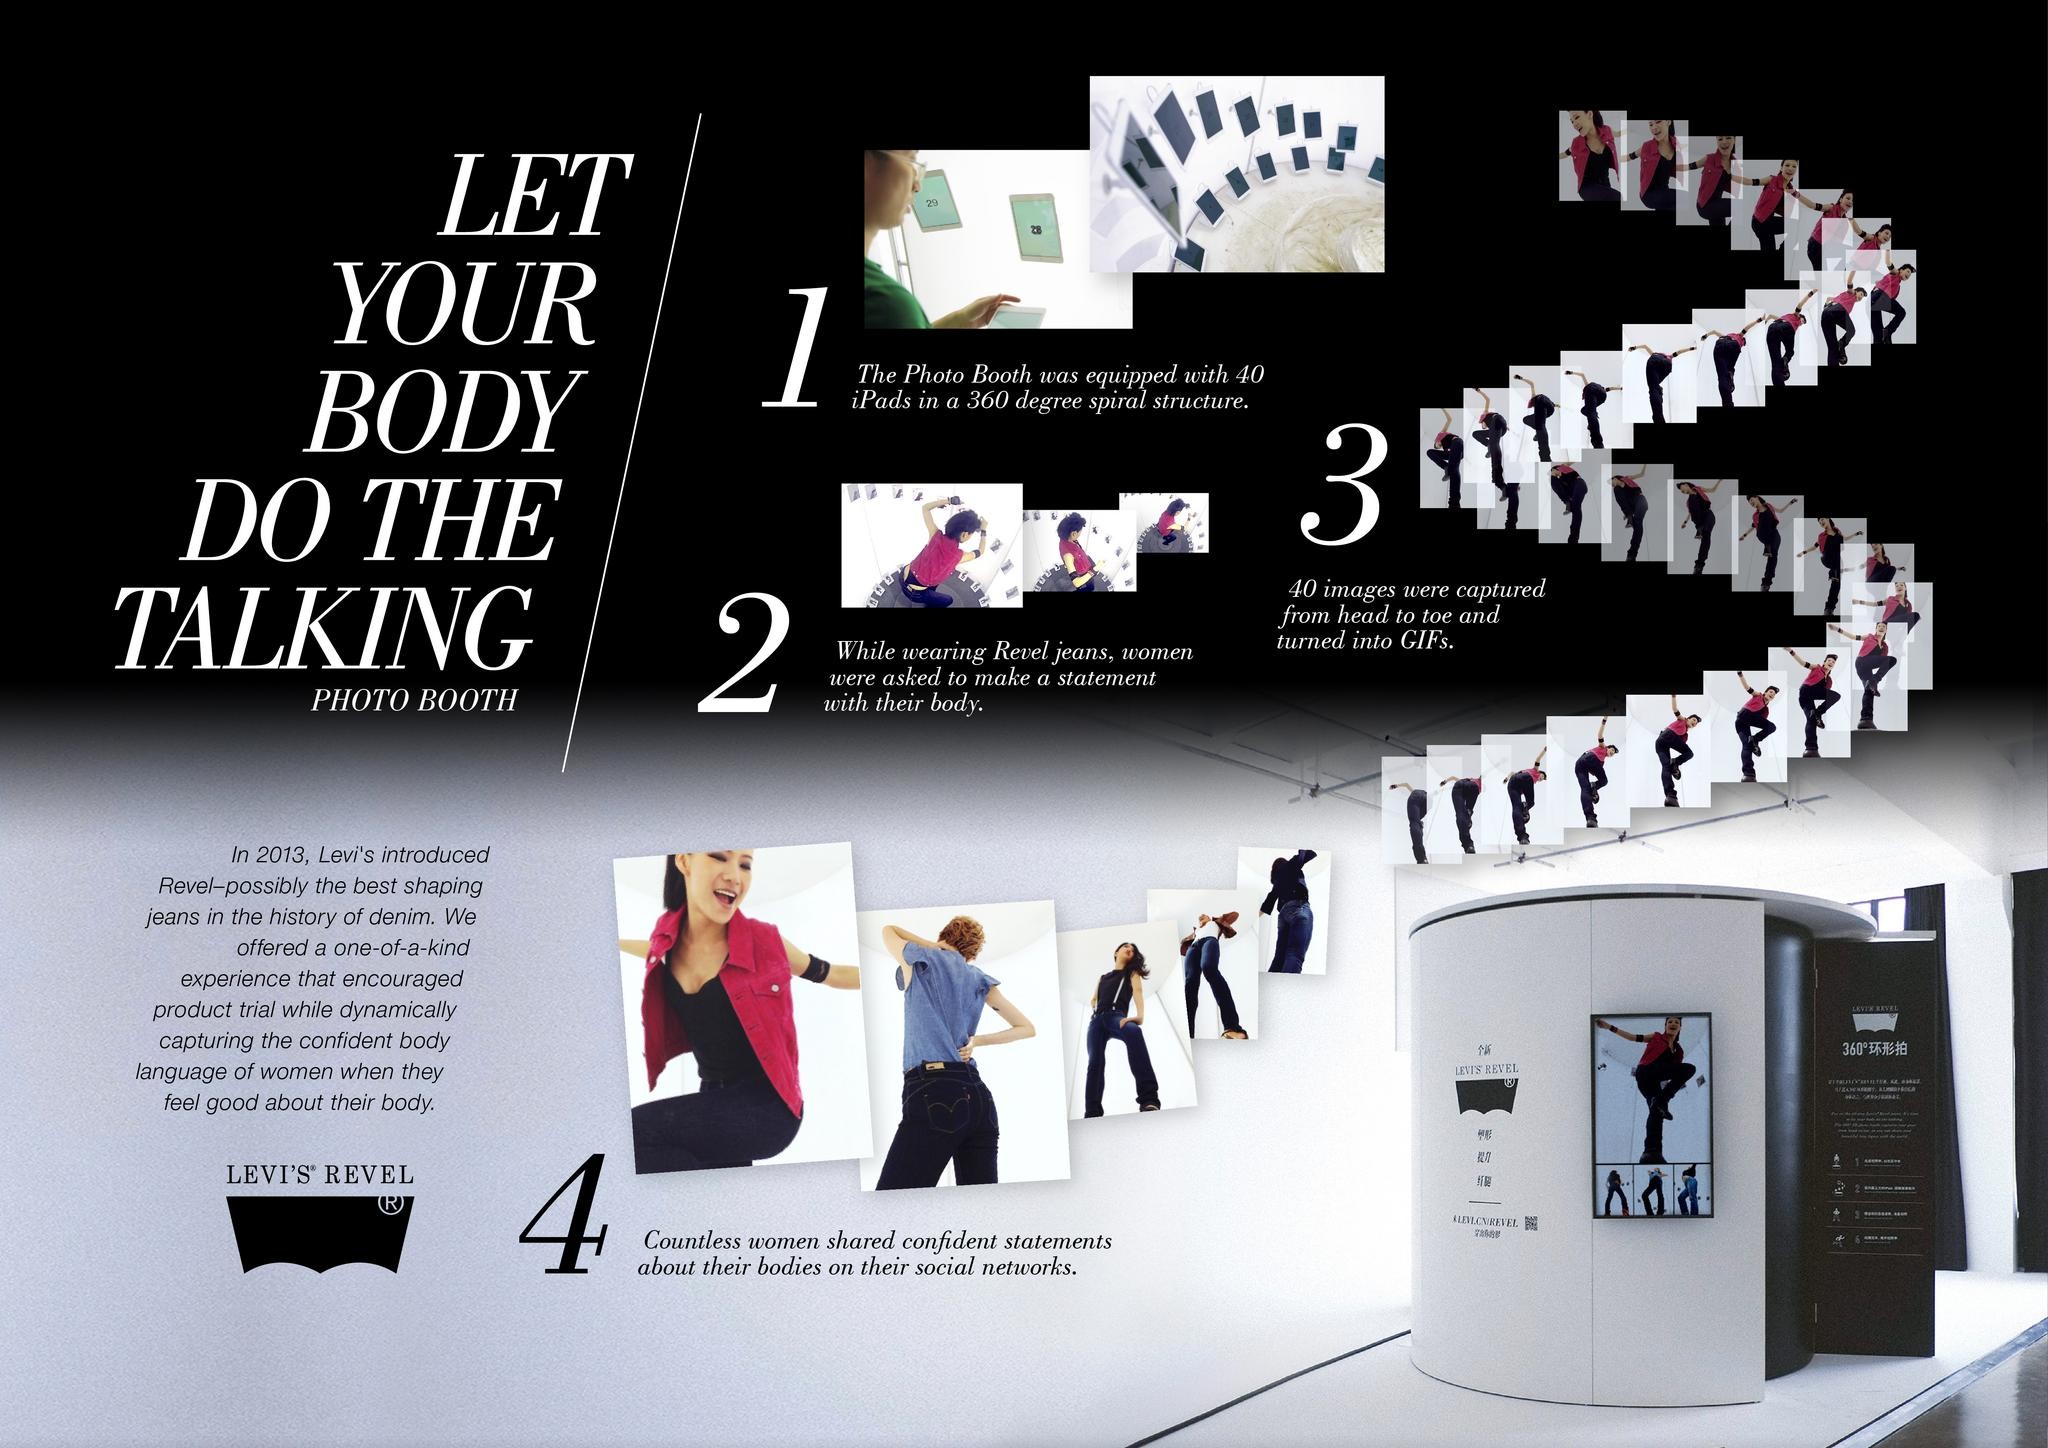 LET YOUR BODY DO THE TALKING 360 DEGREE PHOTO BOOTH